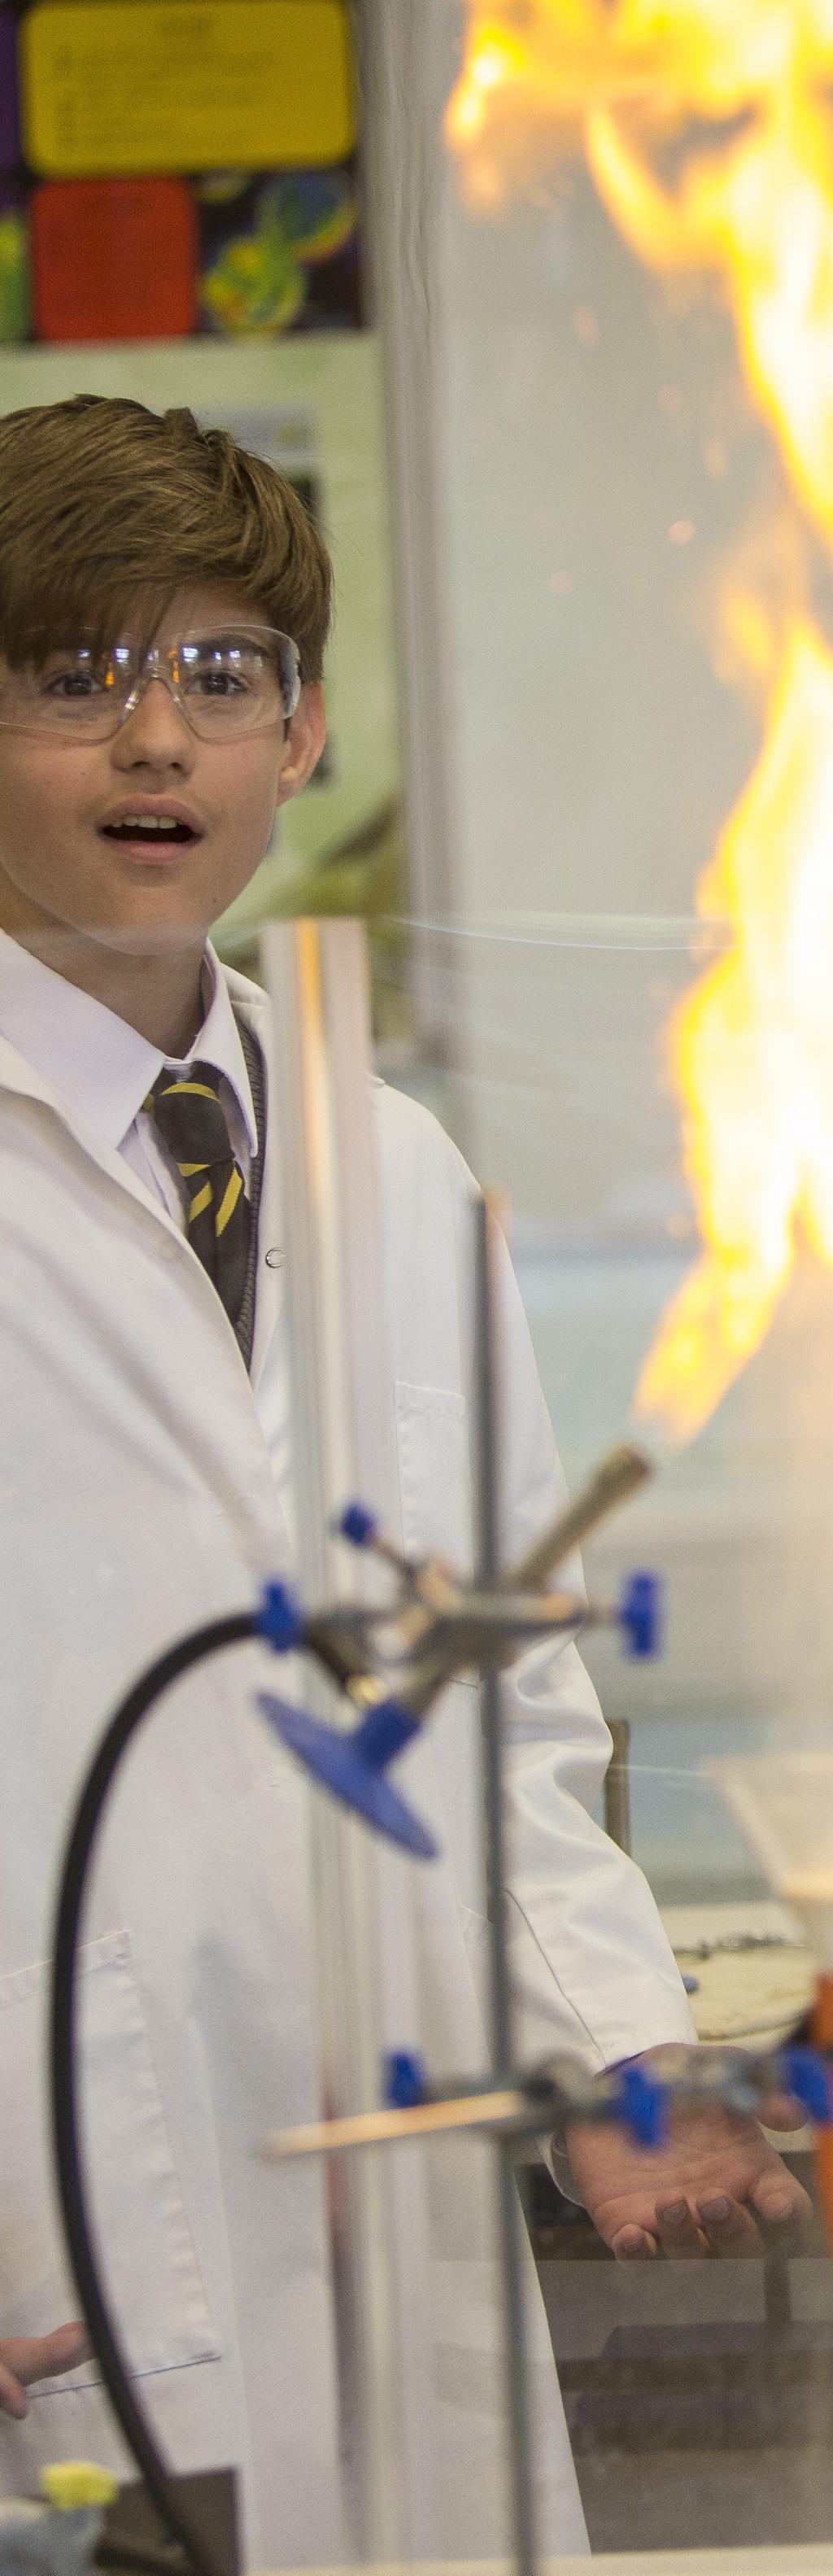 option subjects SCIENCES A minimum of TWO sciences is strongly recommended BIOLOGY CHEMISTRY PHYSICS The John Lyon Biology IGCSE course develops an appreciation for the significance of biological